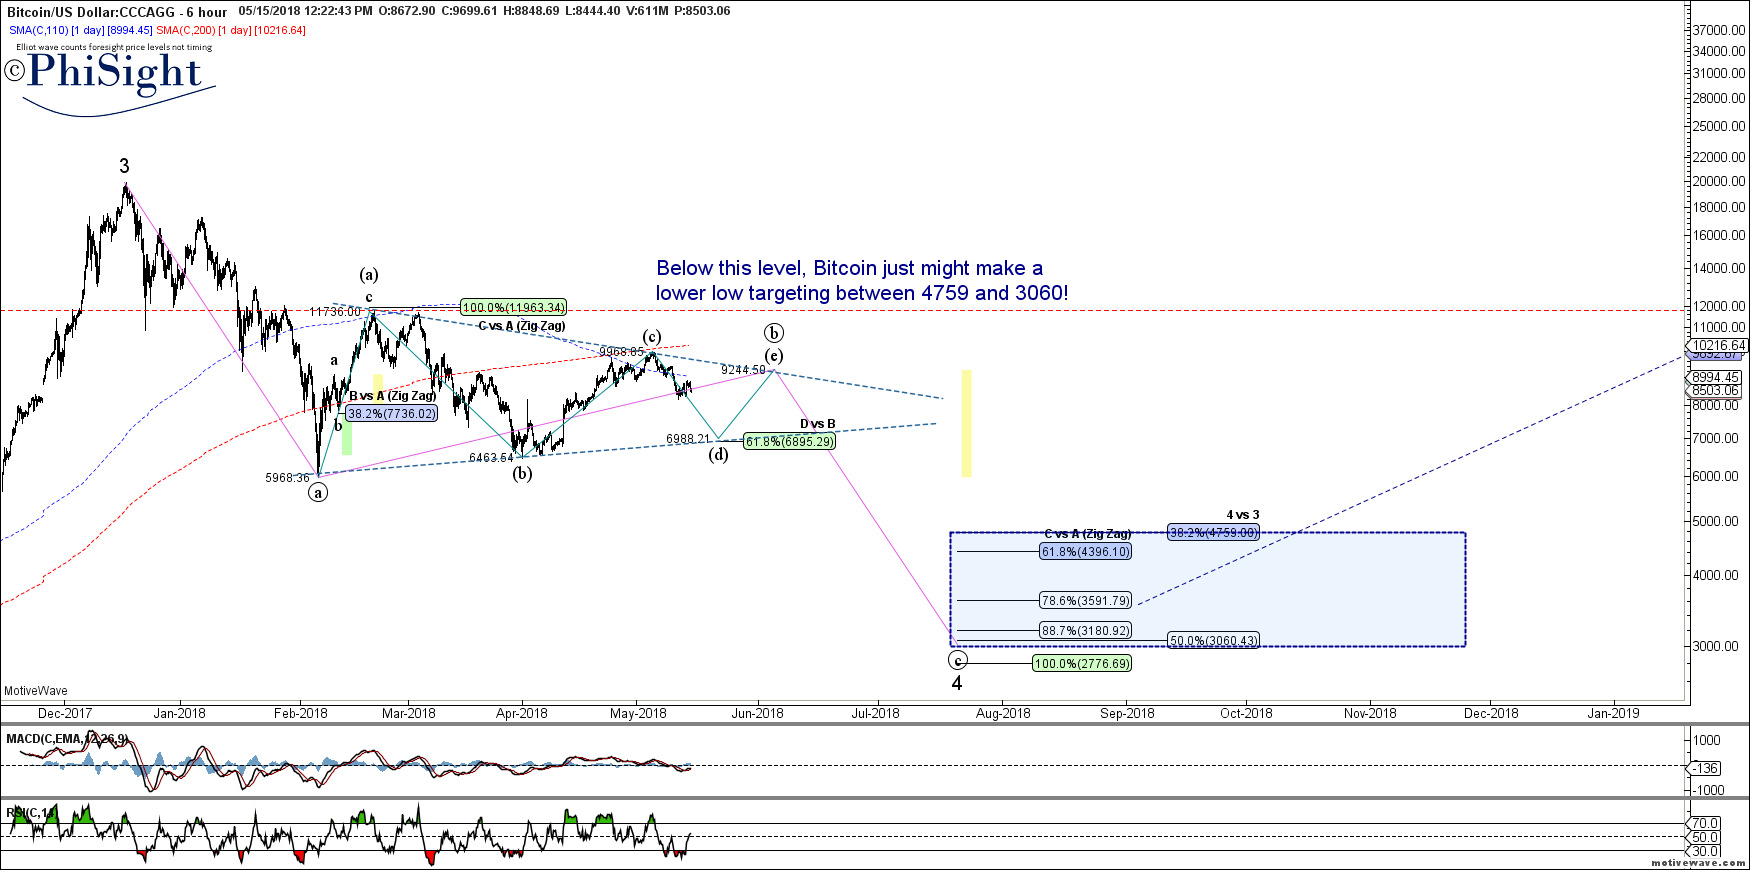 BTCUSD - Primary Analysis - May-15 1222 PM (6 hour).png